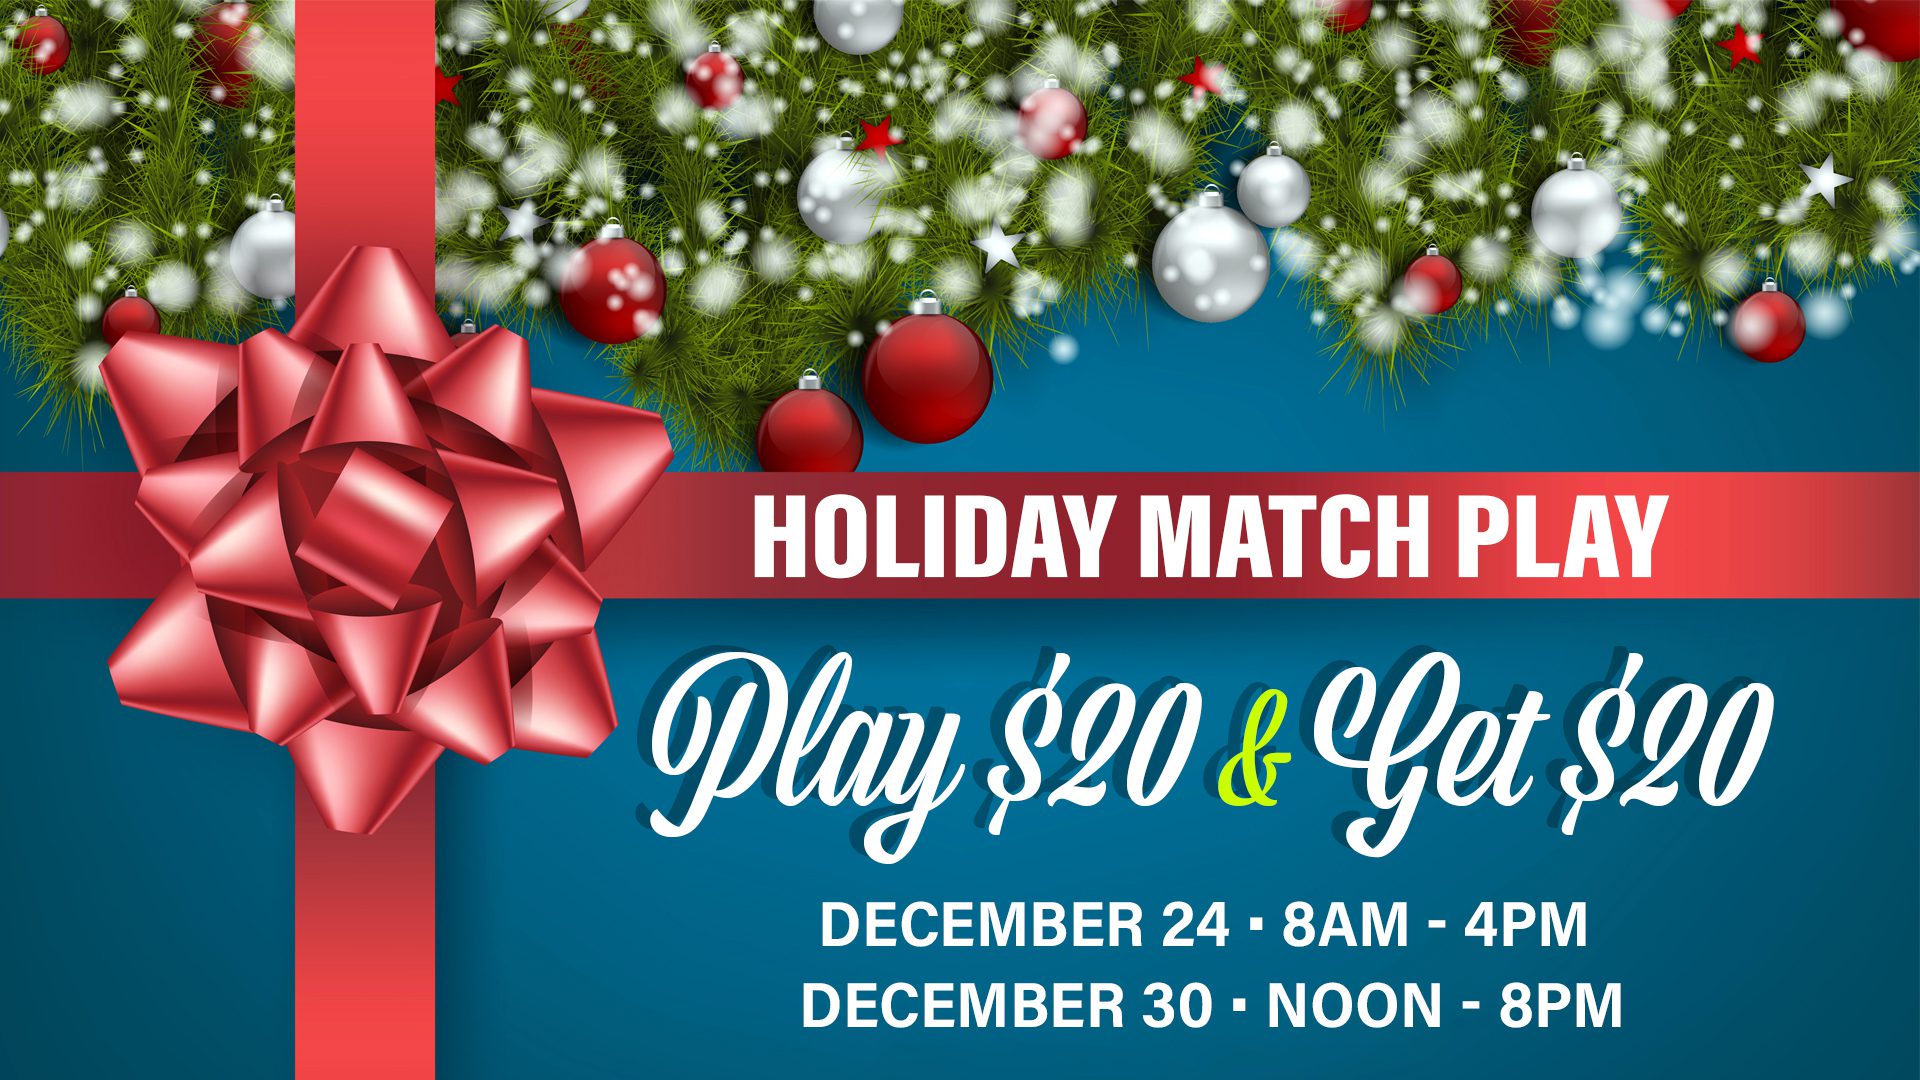 Festive advertisement for a holiday match play event offering a "play $20 & get $20" deal on selected dates and times.